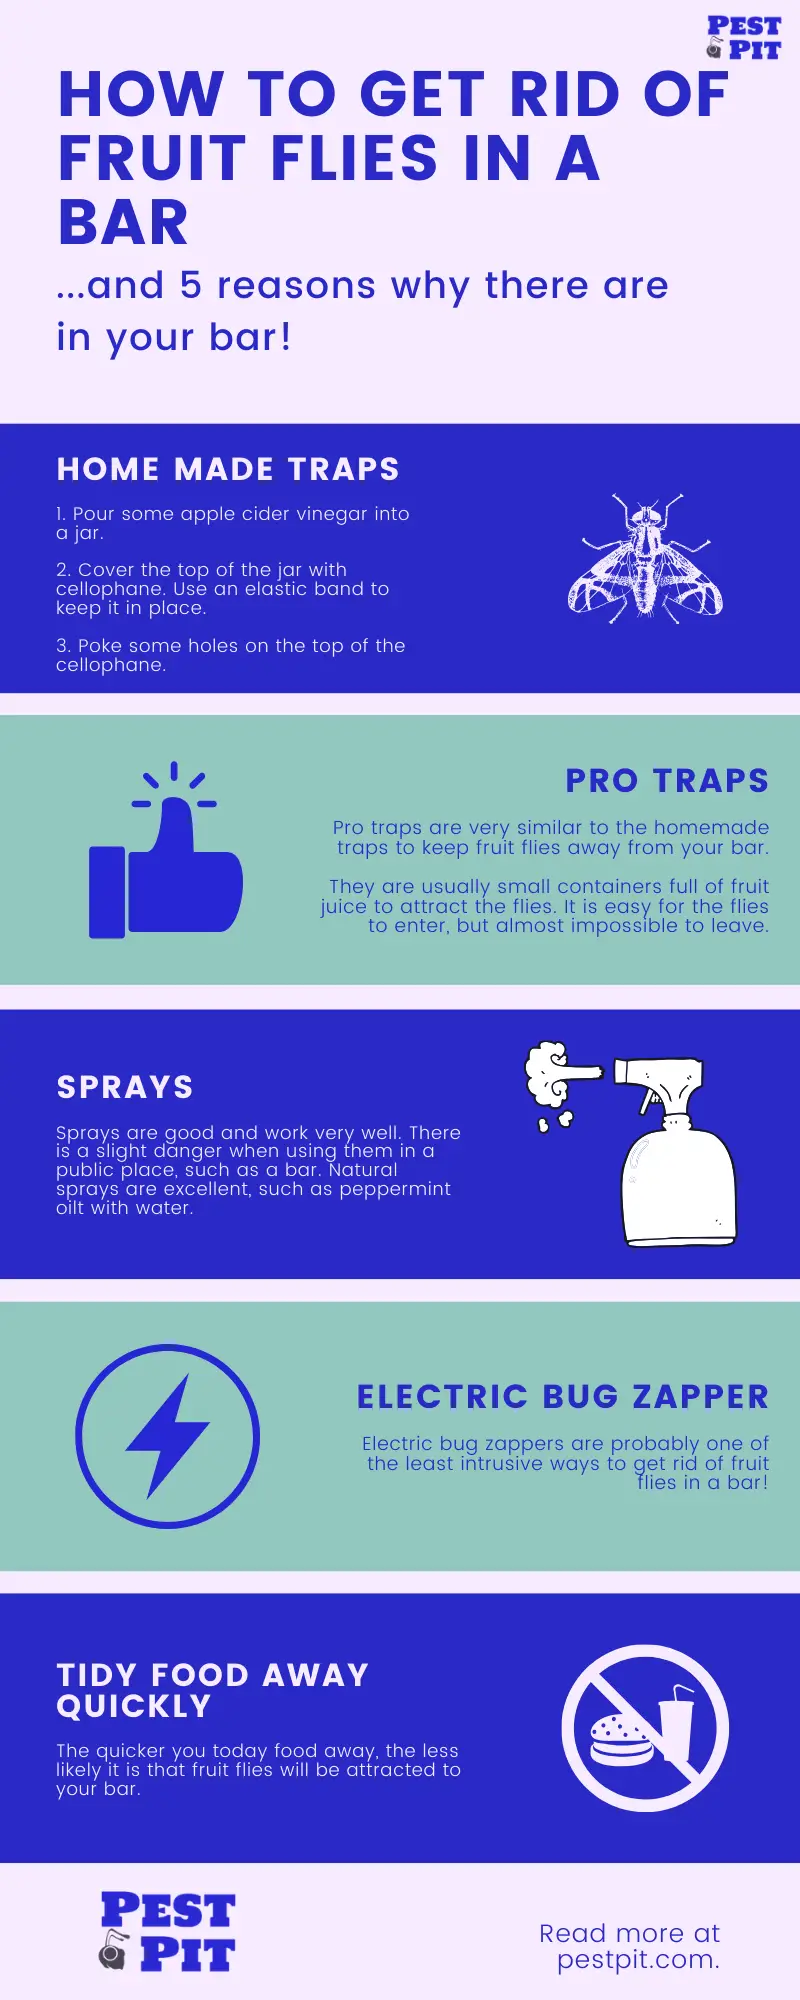 How To Get Rid Of Fruit Flies In A Bar Infographic